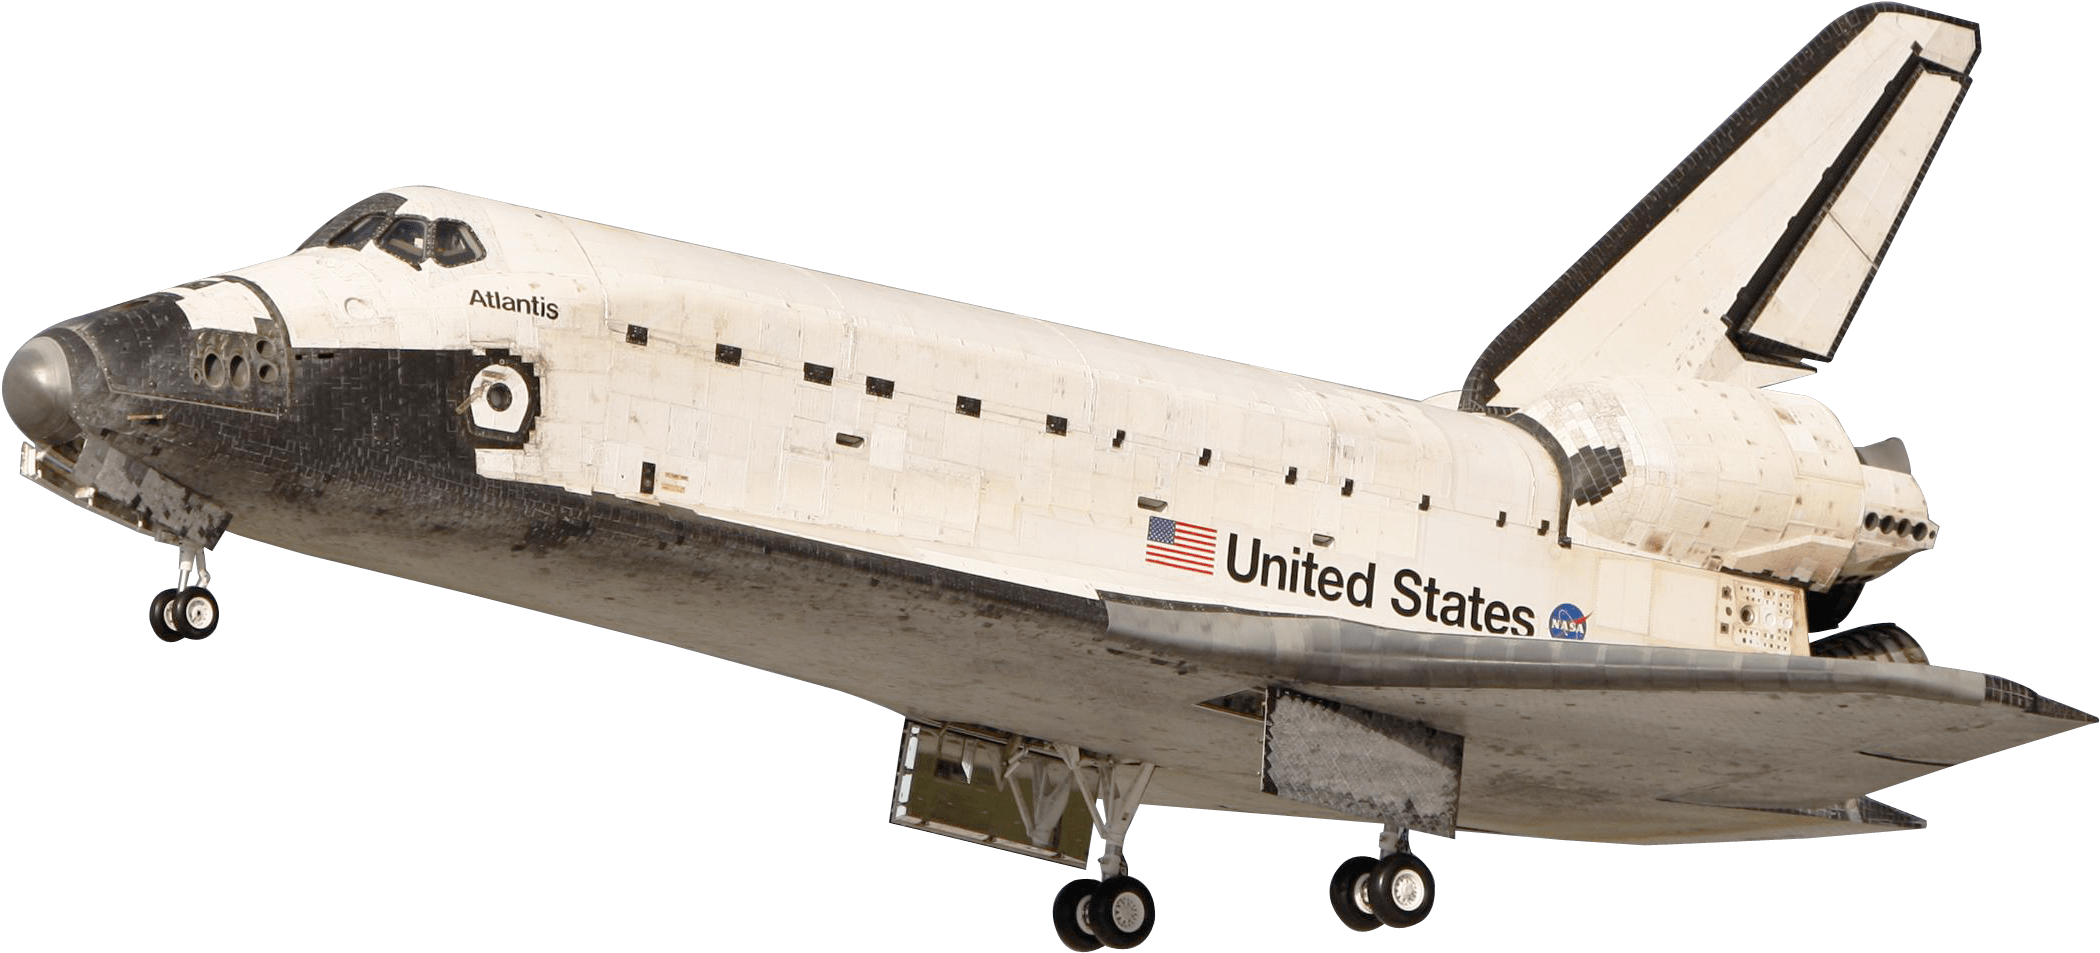 Image Transparent Stock Ship Transparent Space - Space Shuttle No Background (2230x1142)